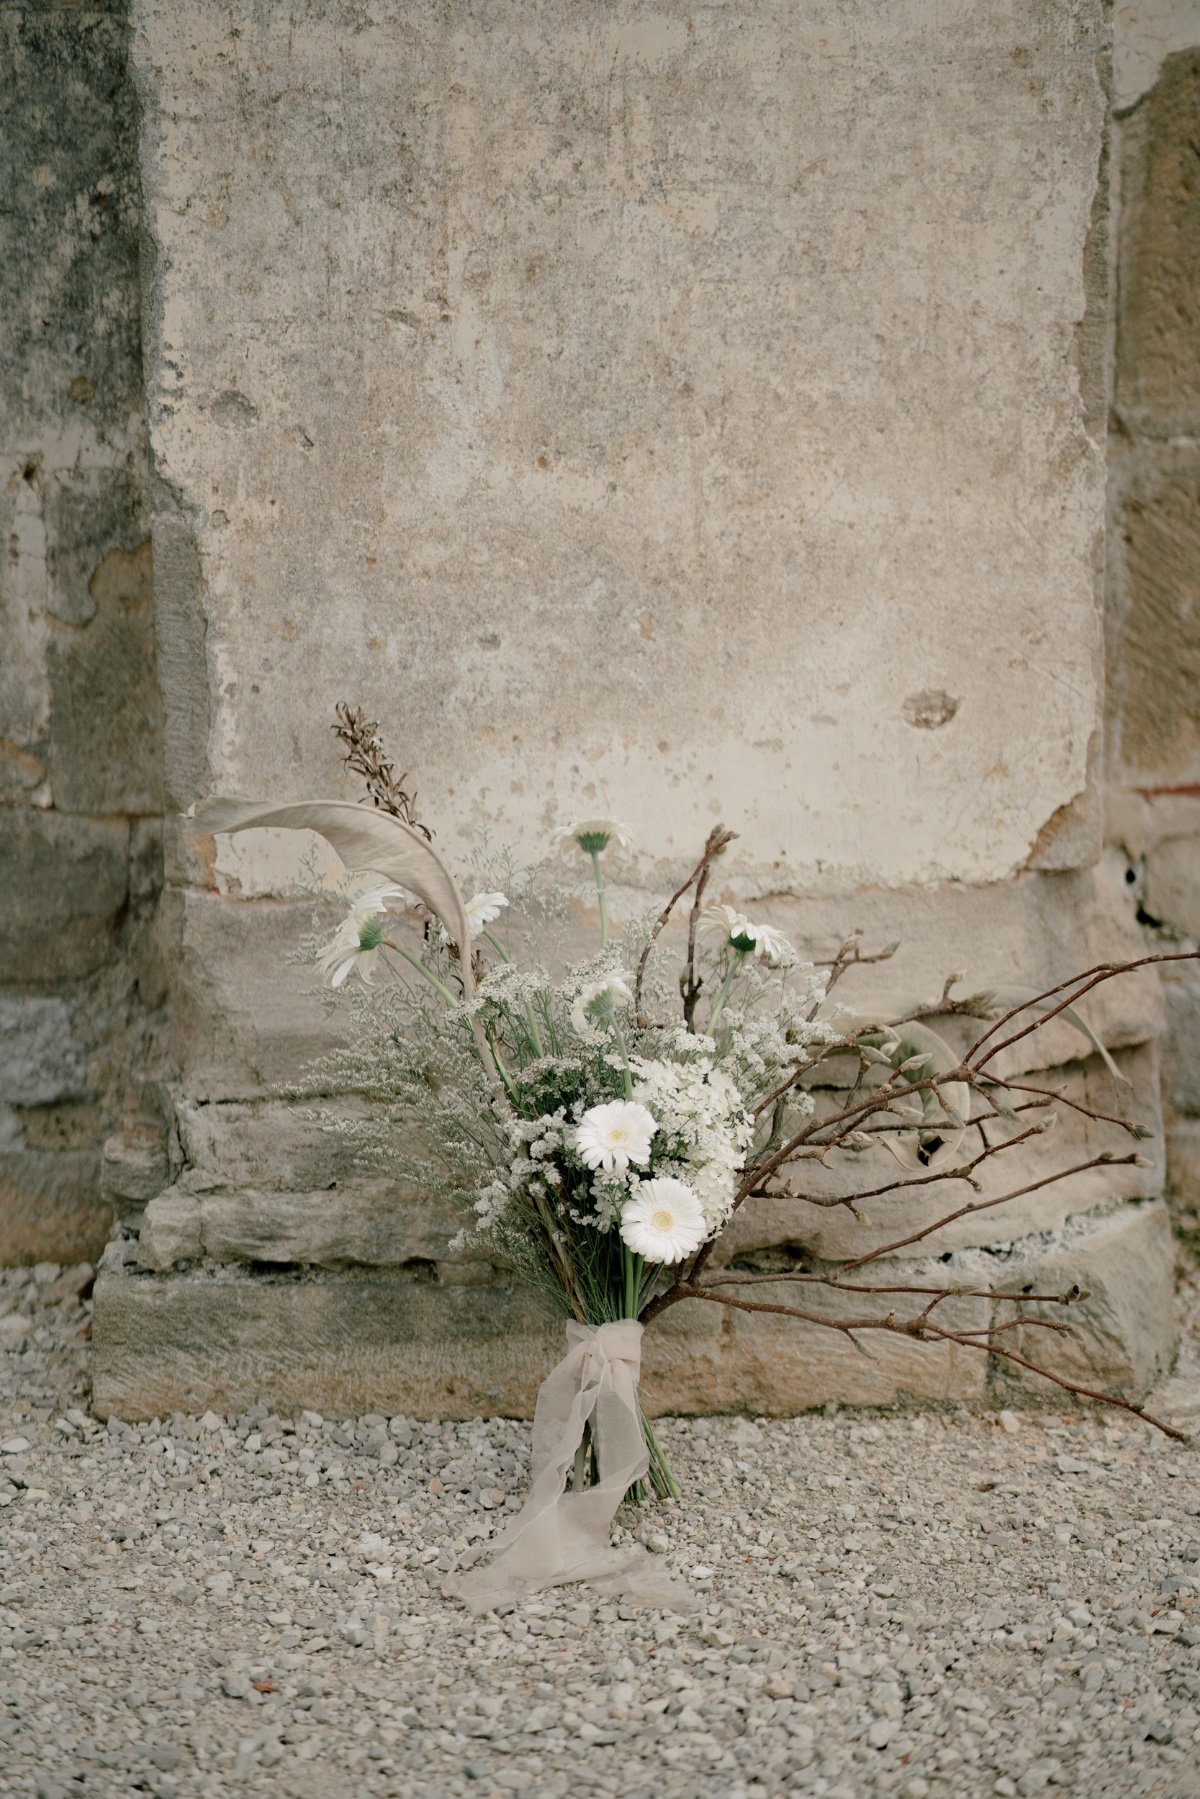 Minimal Elopement in a Historical Abbey in Northern Italy